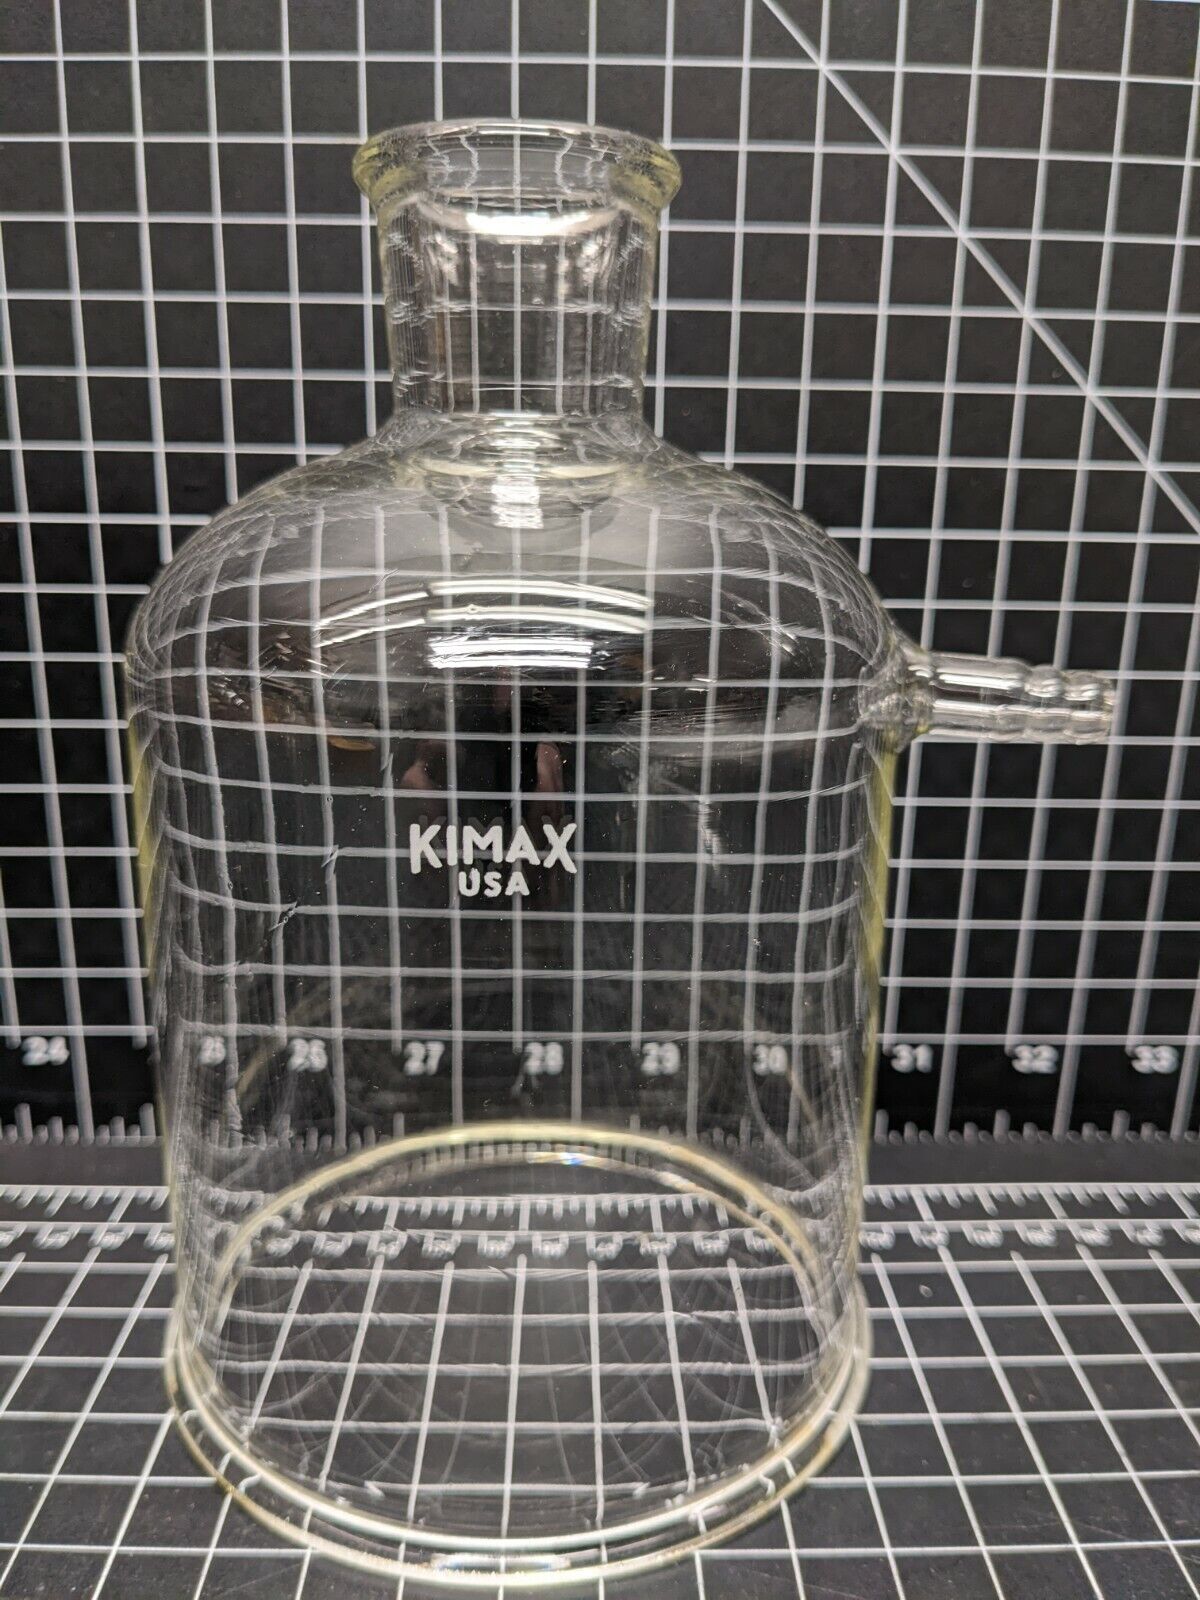 KIMAX Filtering Bell Jar 32450-7511 Vacuum Kimble Chase Pyrex lab glass ace